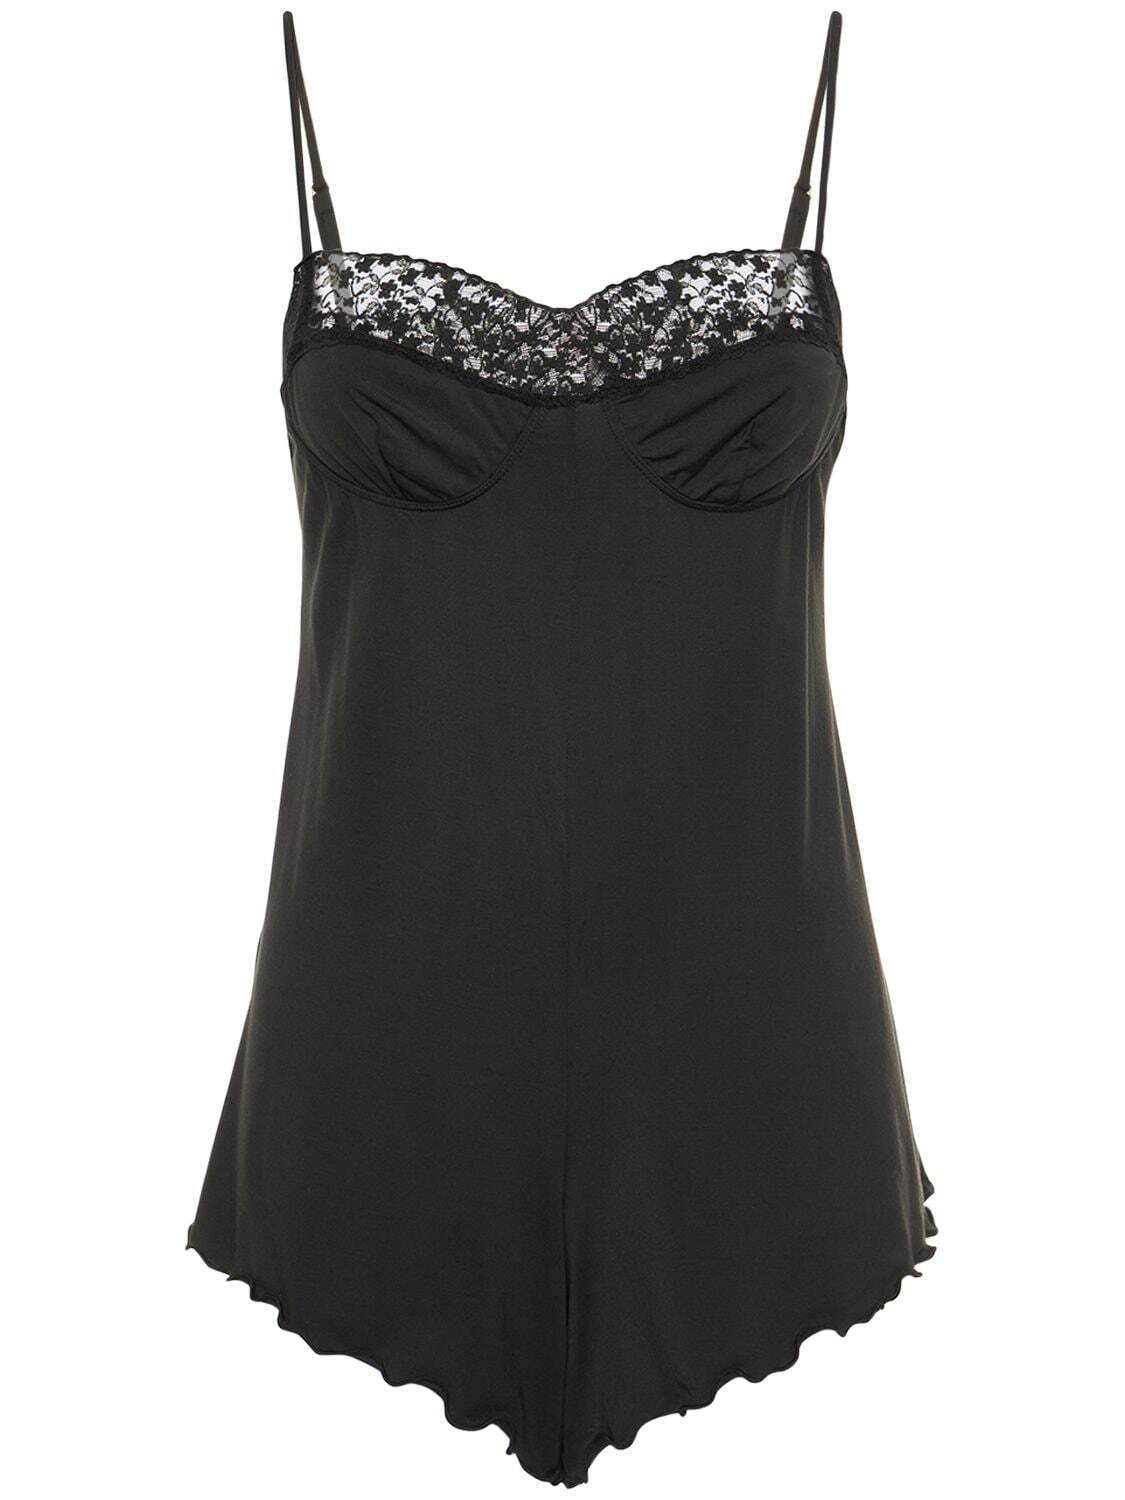 WEWOREWHAT Lace Romper in black